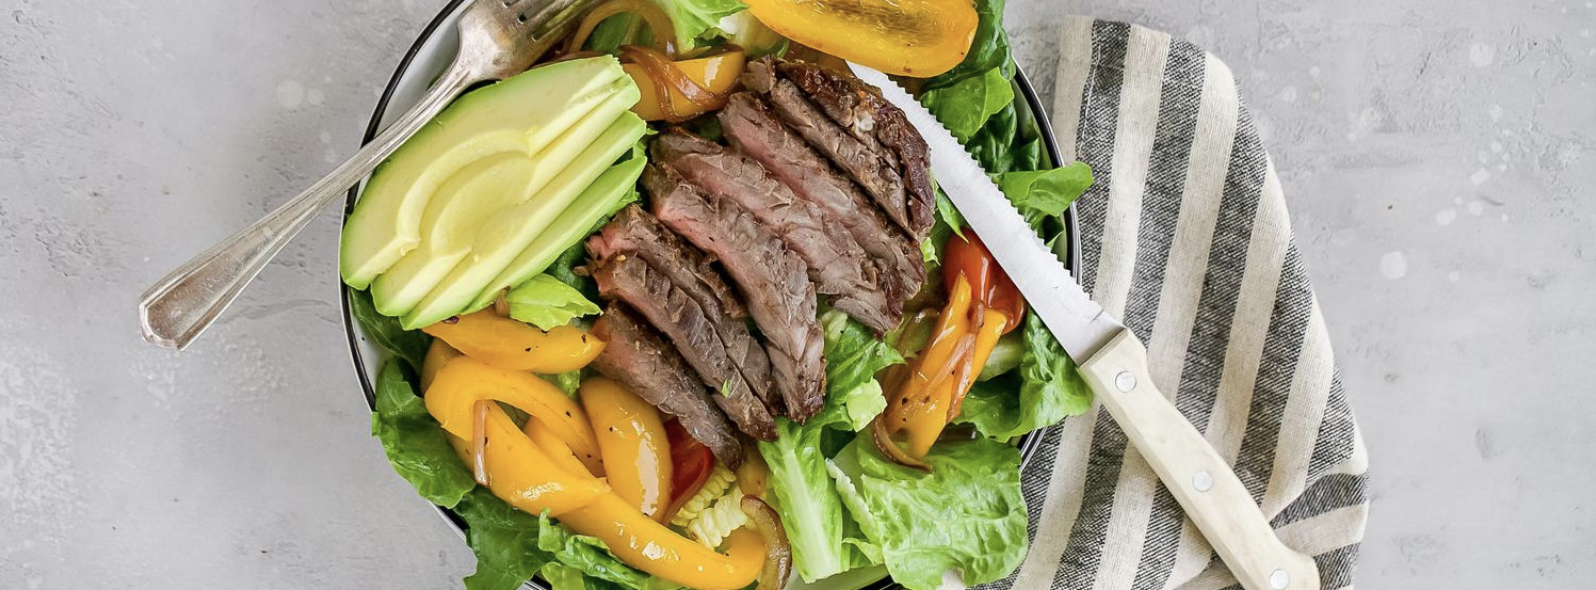 fajita steak salad with avocado and yellow bell peppers